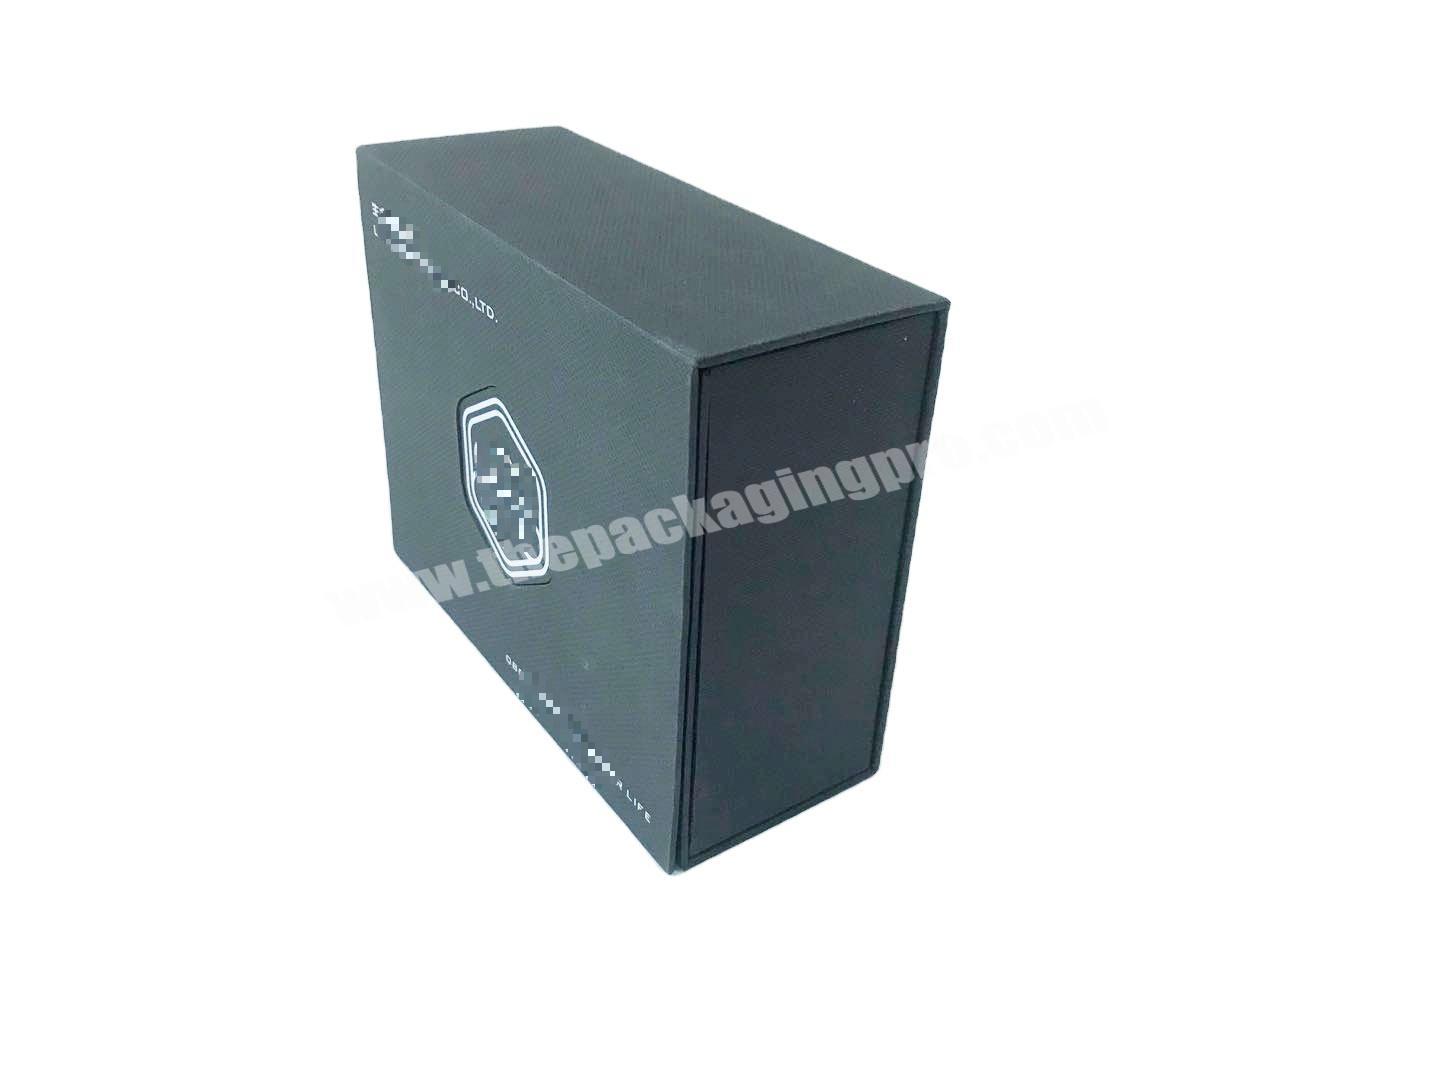 Face mask paper packing box with blister pack inside Black paper gift box